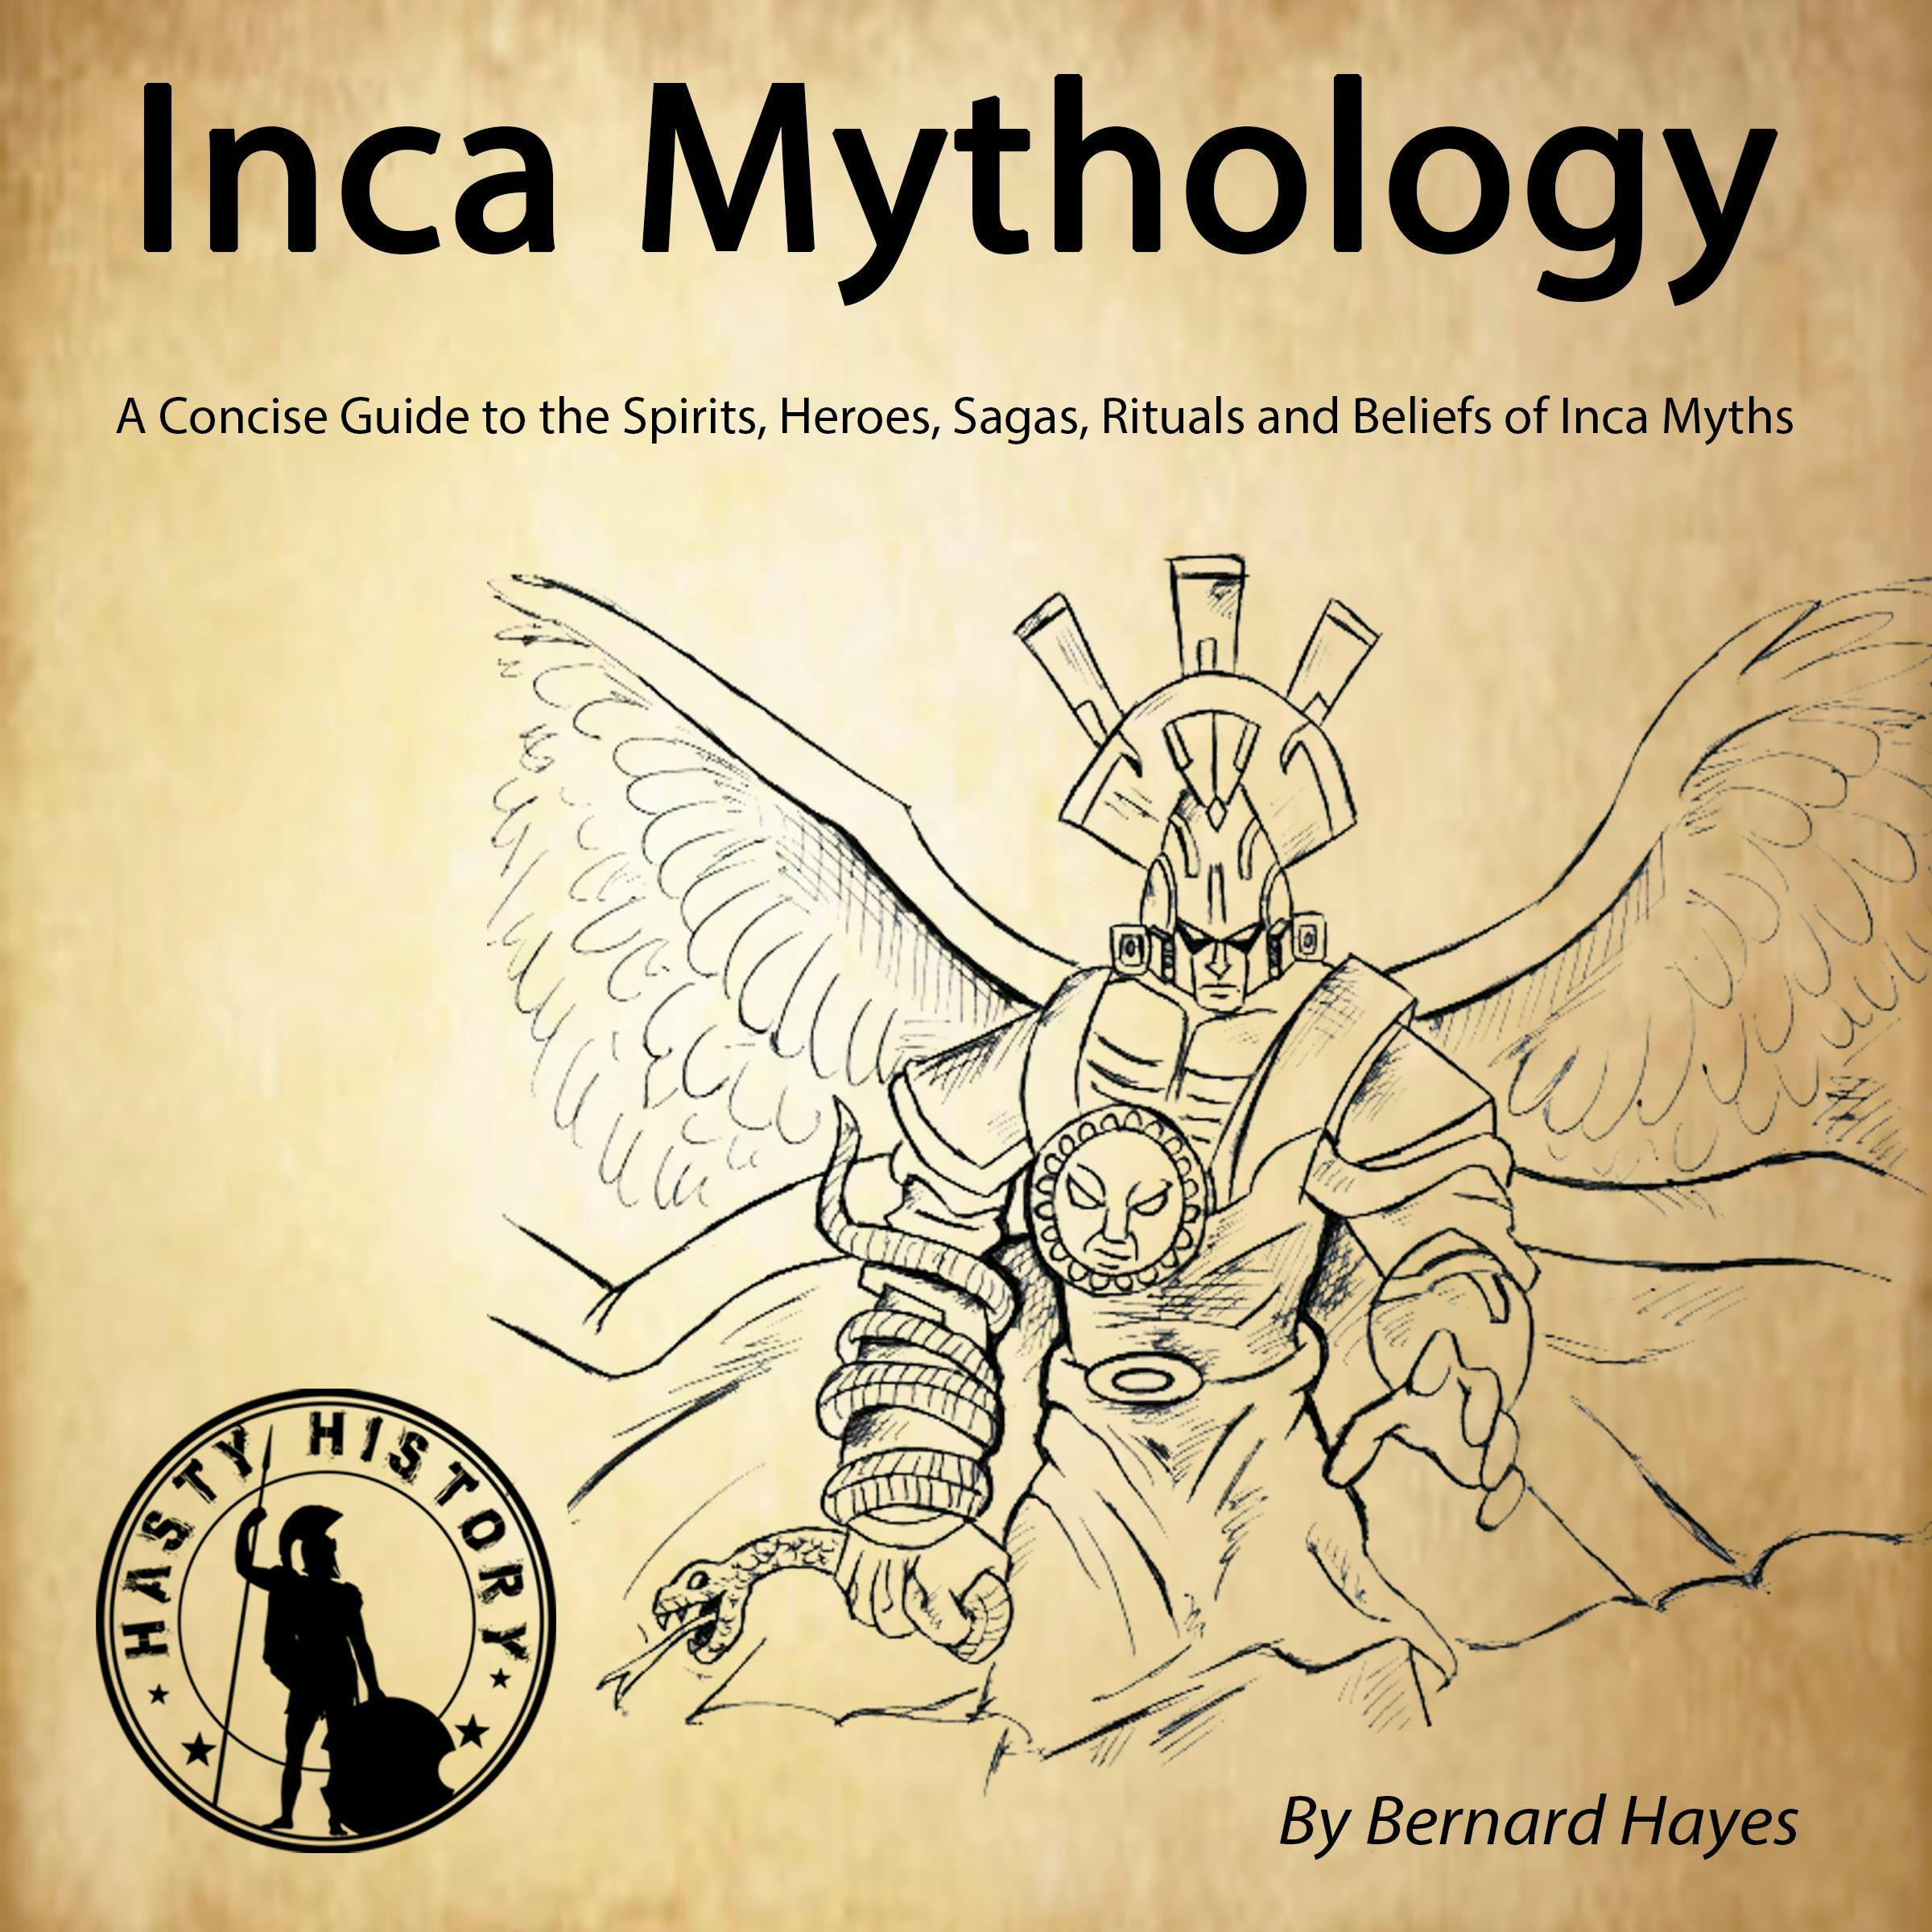 Inca Mythology: A Concise Guide to the Gods, Heroes, Sagas, Rituals and Beliefs of Inca Myths - Bernard Hayes